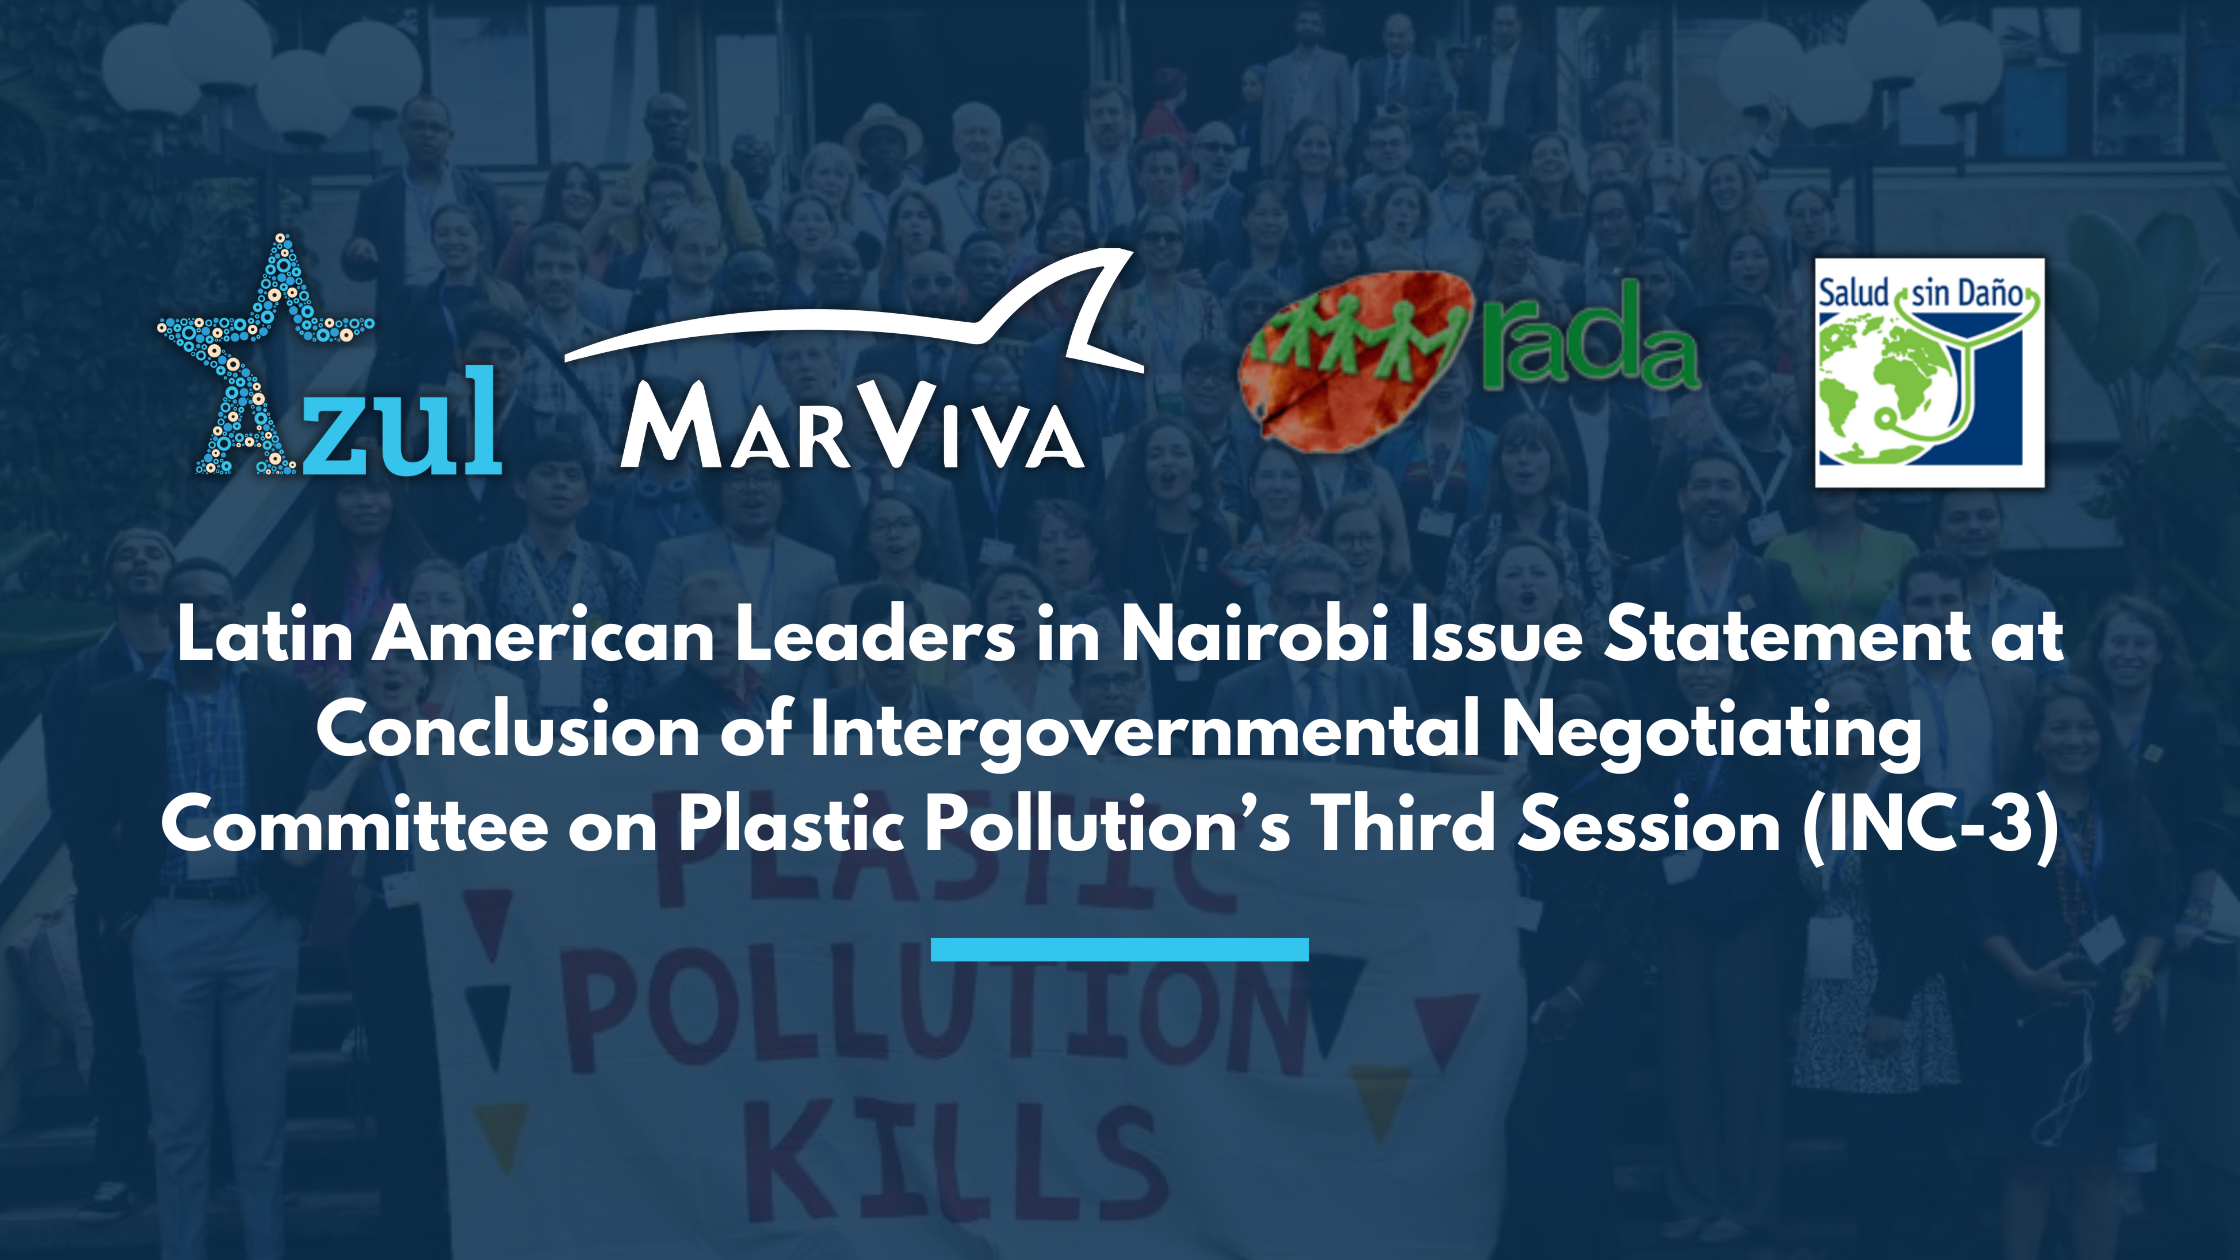 Latin American Leaders in Nairobi Issue Statement at Conclusion of Intergovernmental Negotiating Committee on Plastic Pollution’s Third Session (INC-3)